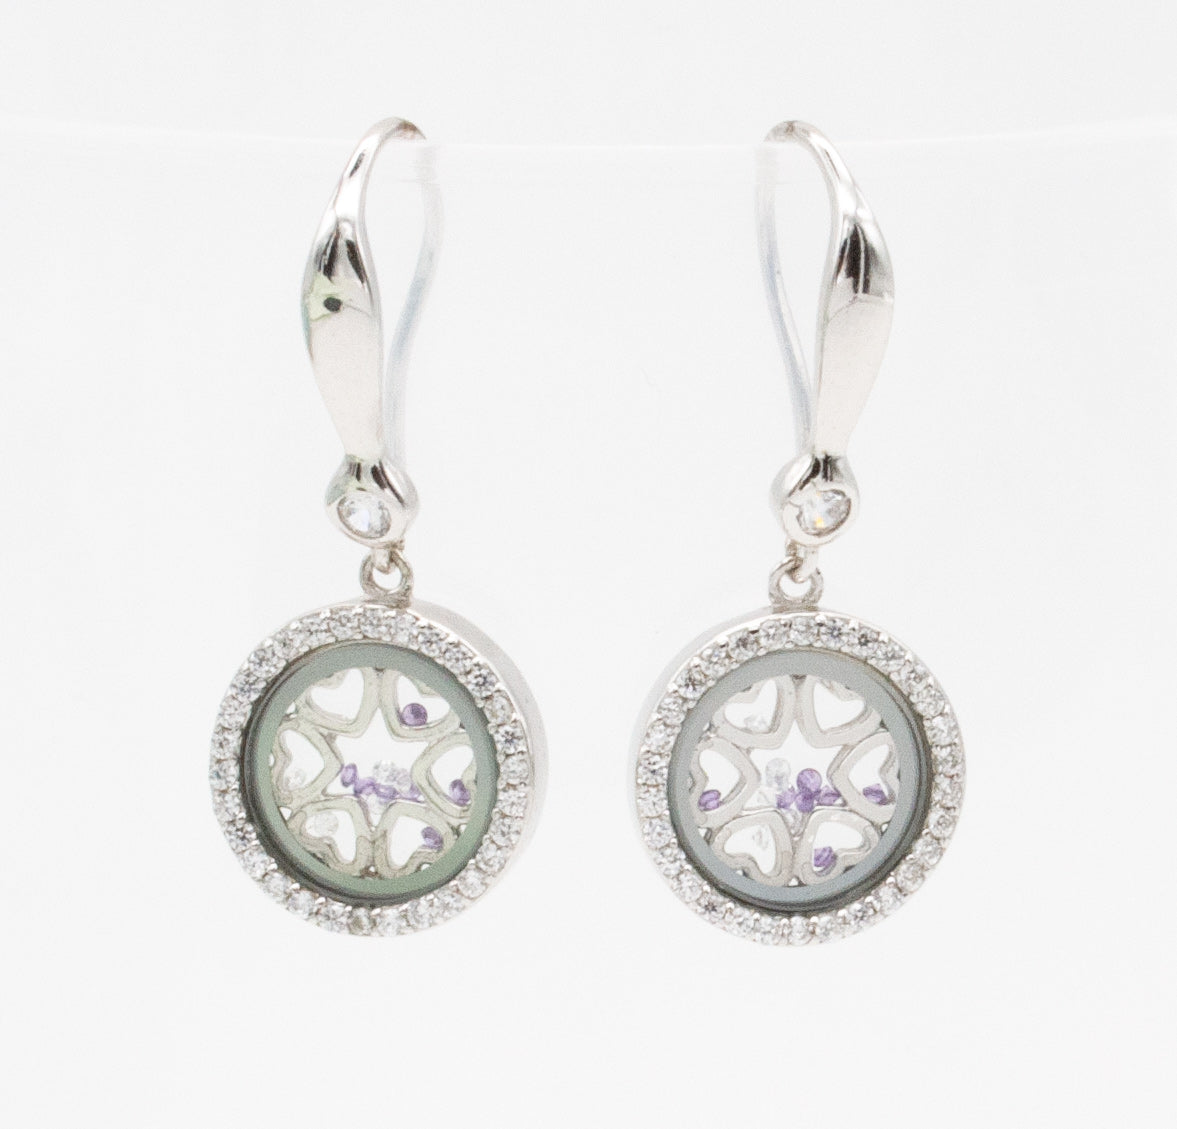 Jewdii 925 Sterling Silver with Cubic Zirconia Earrings